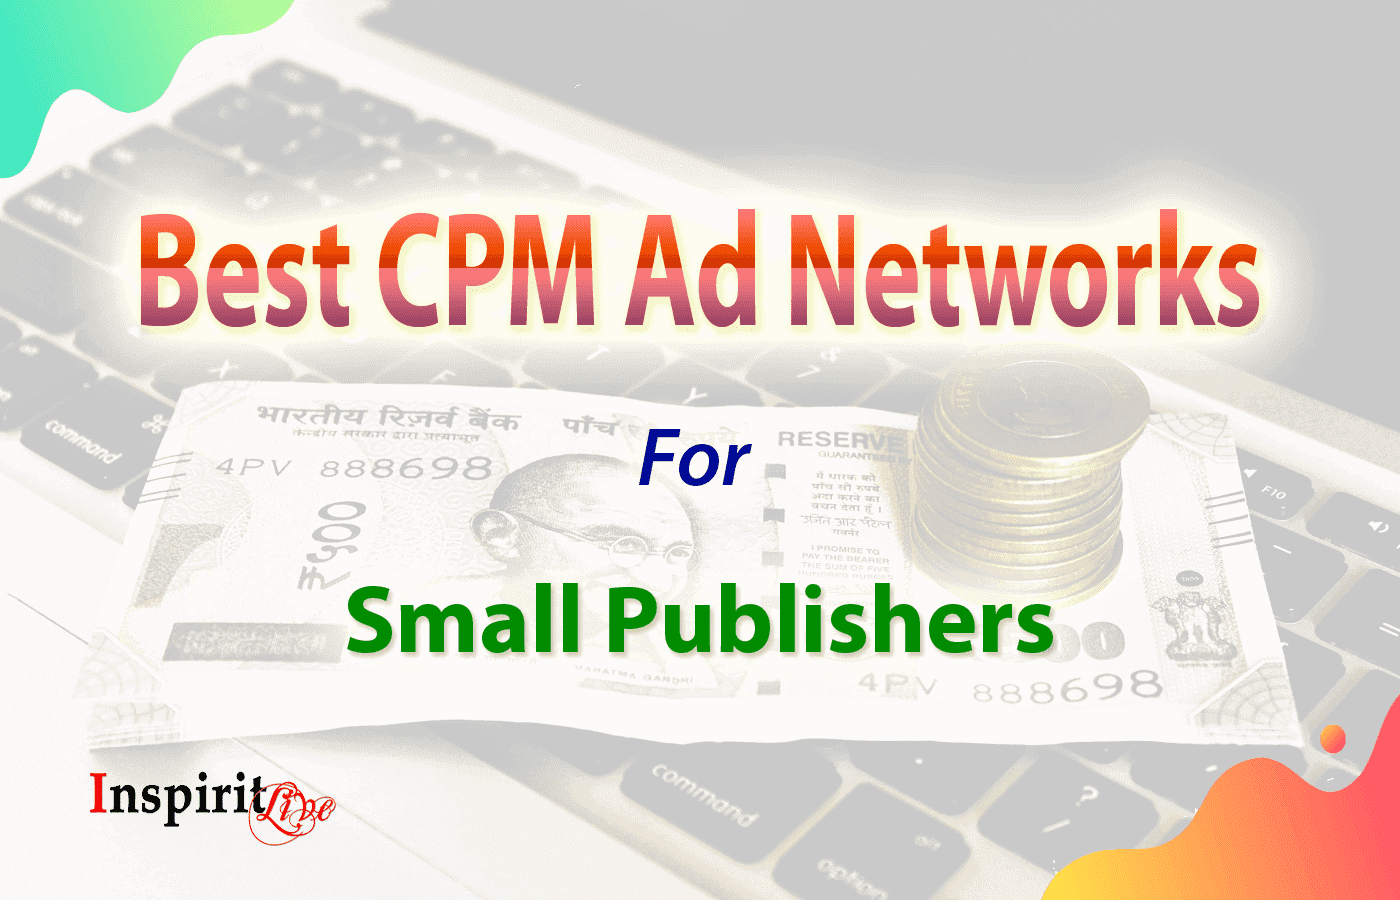 Best CPM Ad Networks For Small Publishers